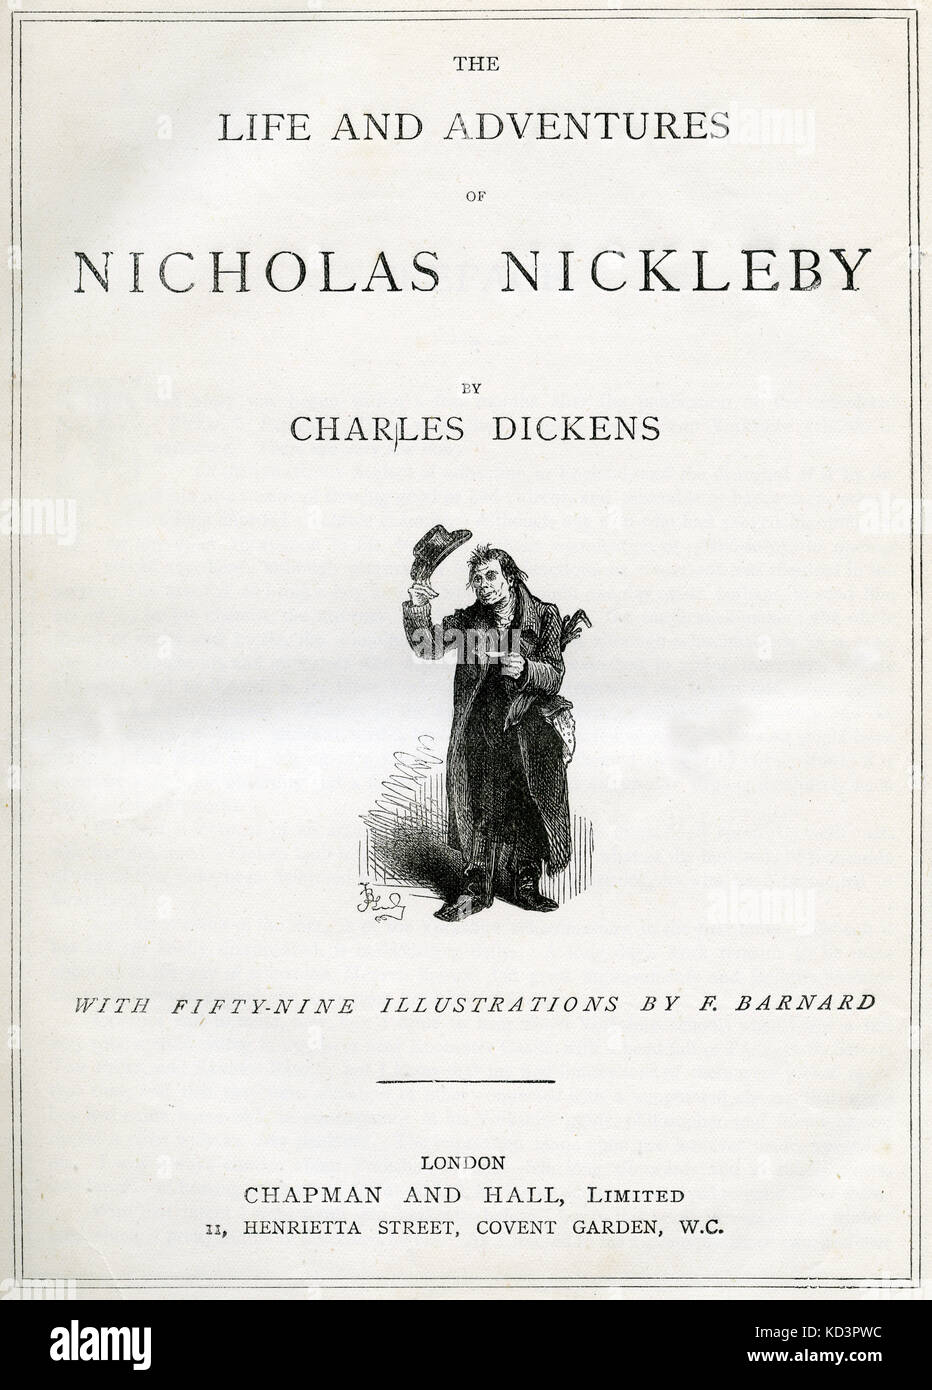 The Life & Adventures of Nicholas Nickleby  by Charles Dickens Title page -   English novelist, 7 February 1812 - 9 June 1870. Illustration by Frederick (Fred) Barnard .  London . Chapman and Hall. Stock Photo